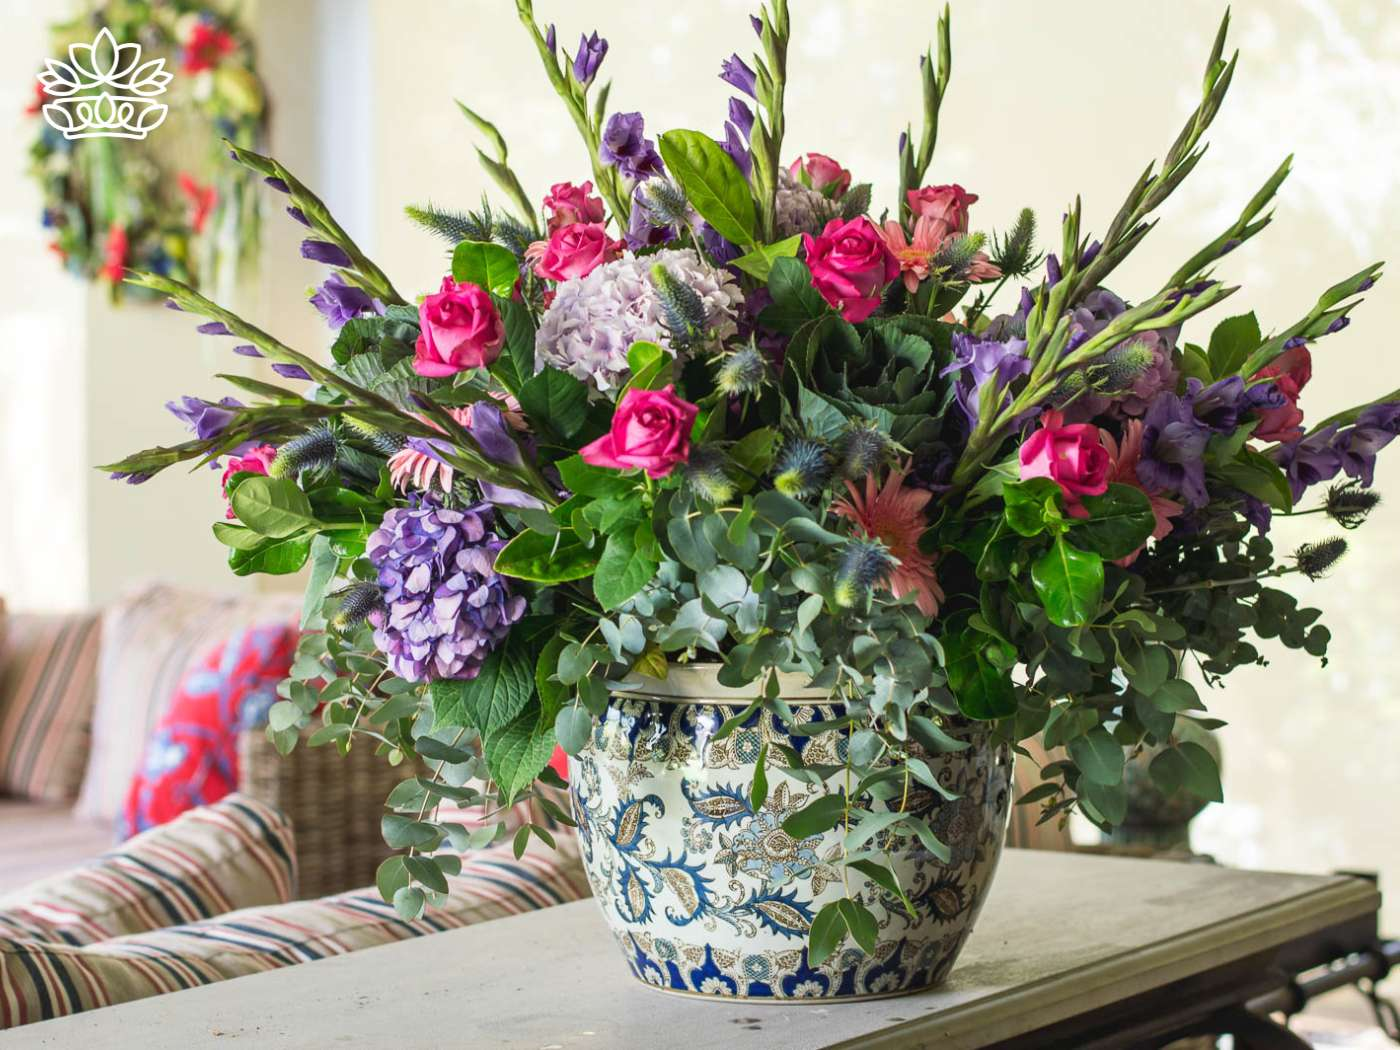 Opulent arrangement of roses and hydrangeas in a classic vase, reflecting the same-day delivery service of gifts by experienced florists for nationwide delivery, from Fabulous Flowers and Gifts.